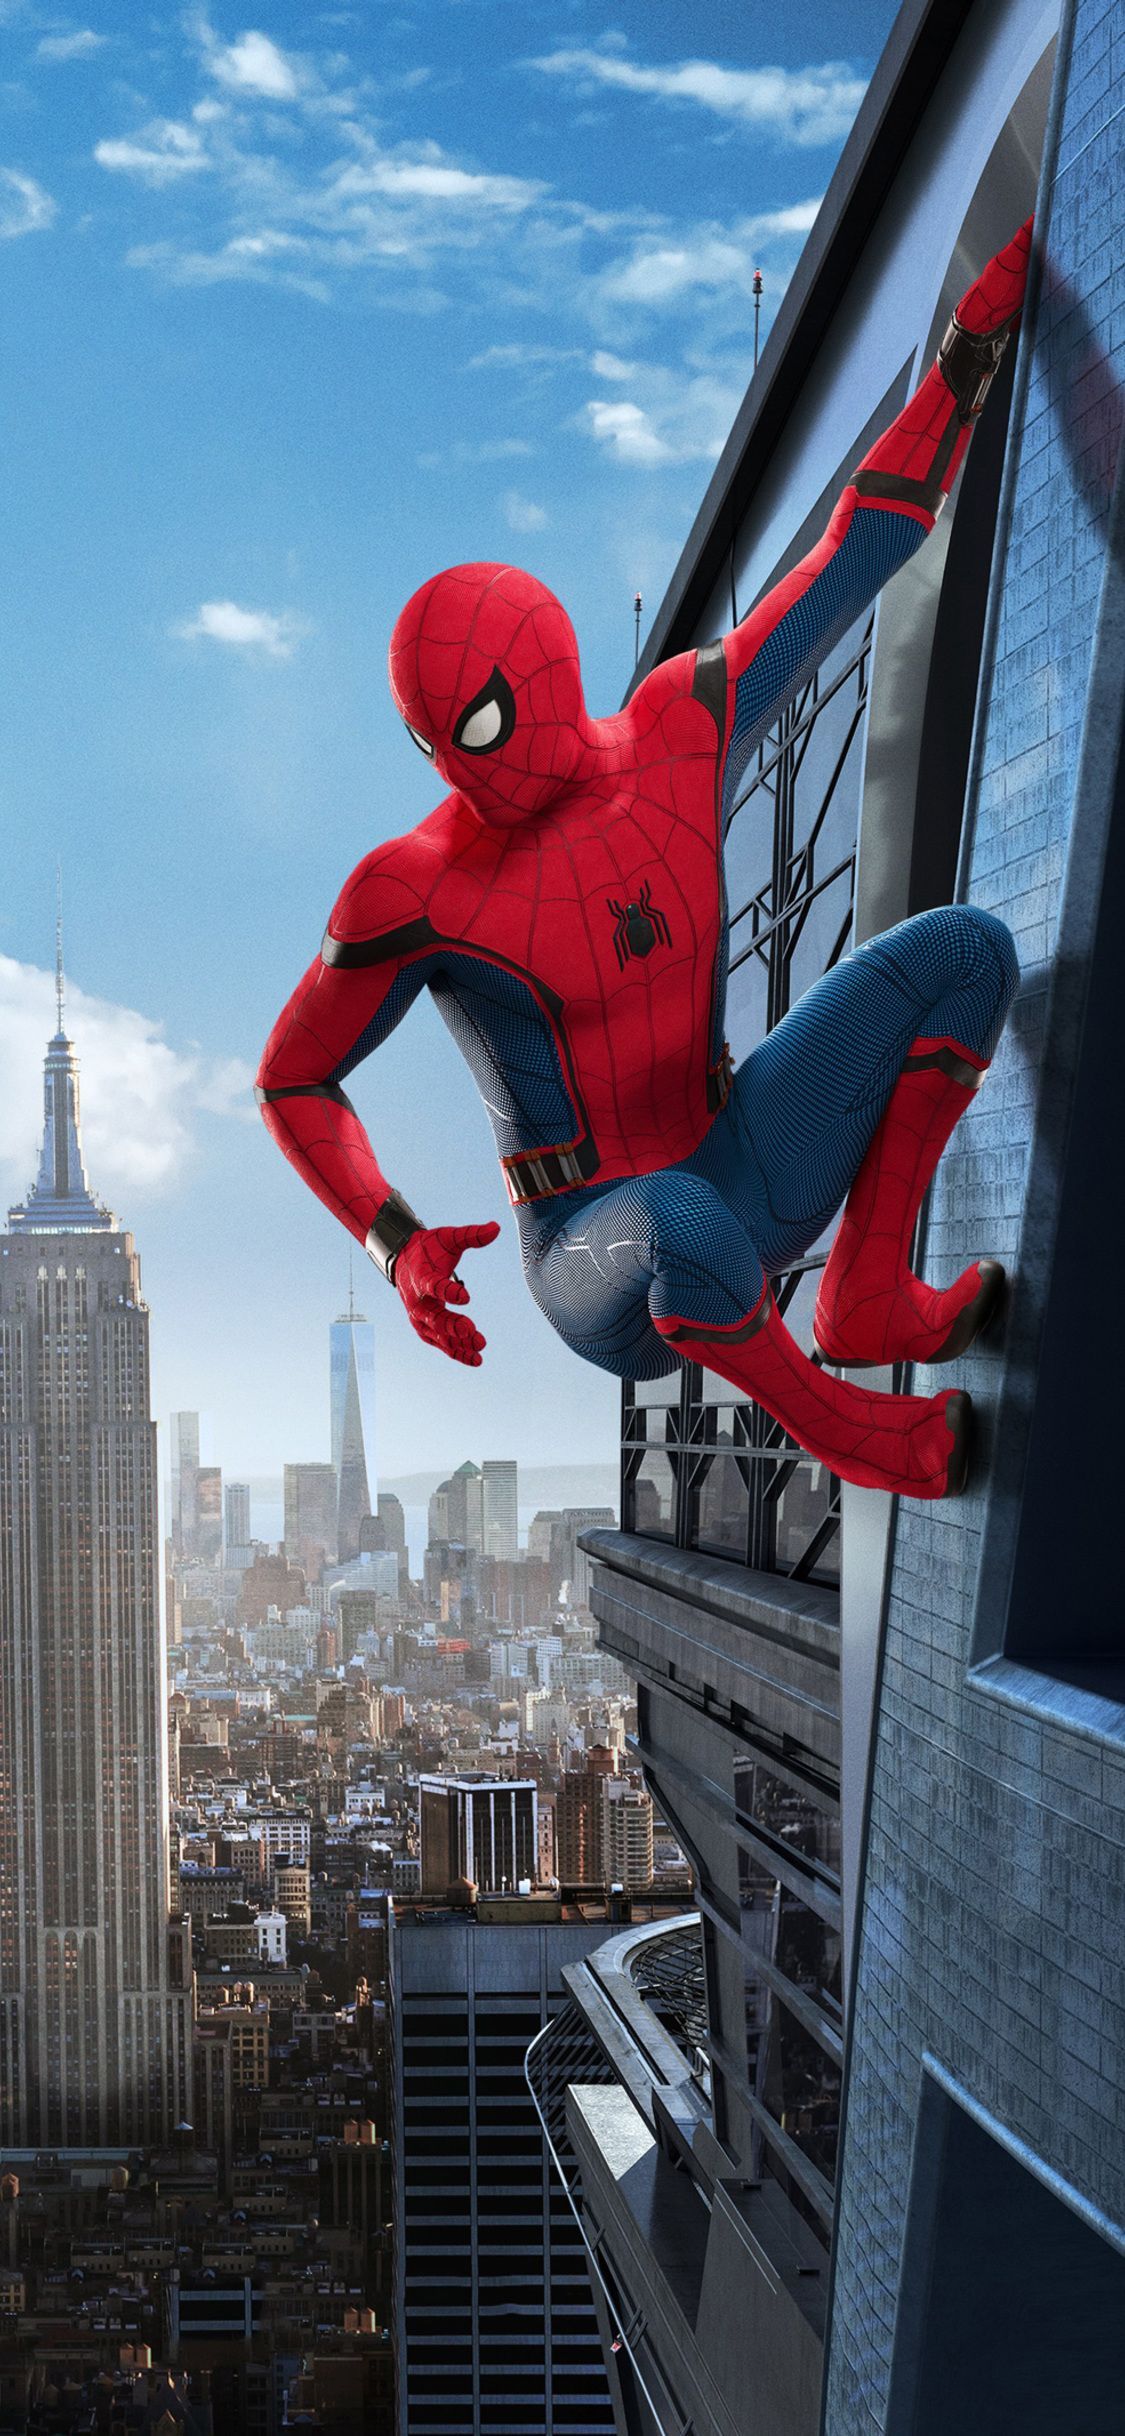 Spiderman Homecoming iPhone XS, iPhone iPhone X HD 4k Wallpaper, Image, Background, Photo. Marvel comics wallpaper, Spiderman, Spiderman picture